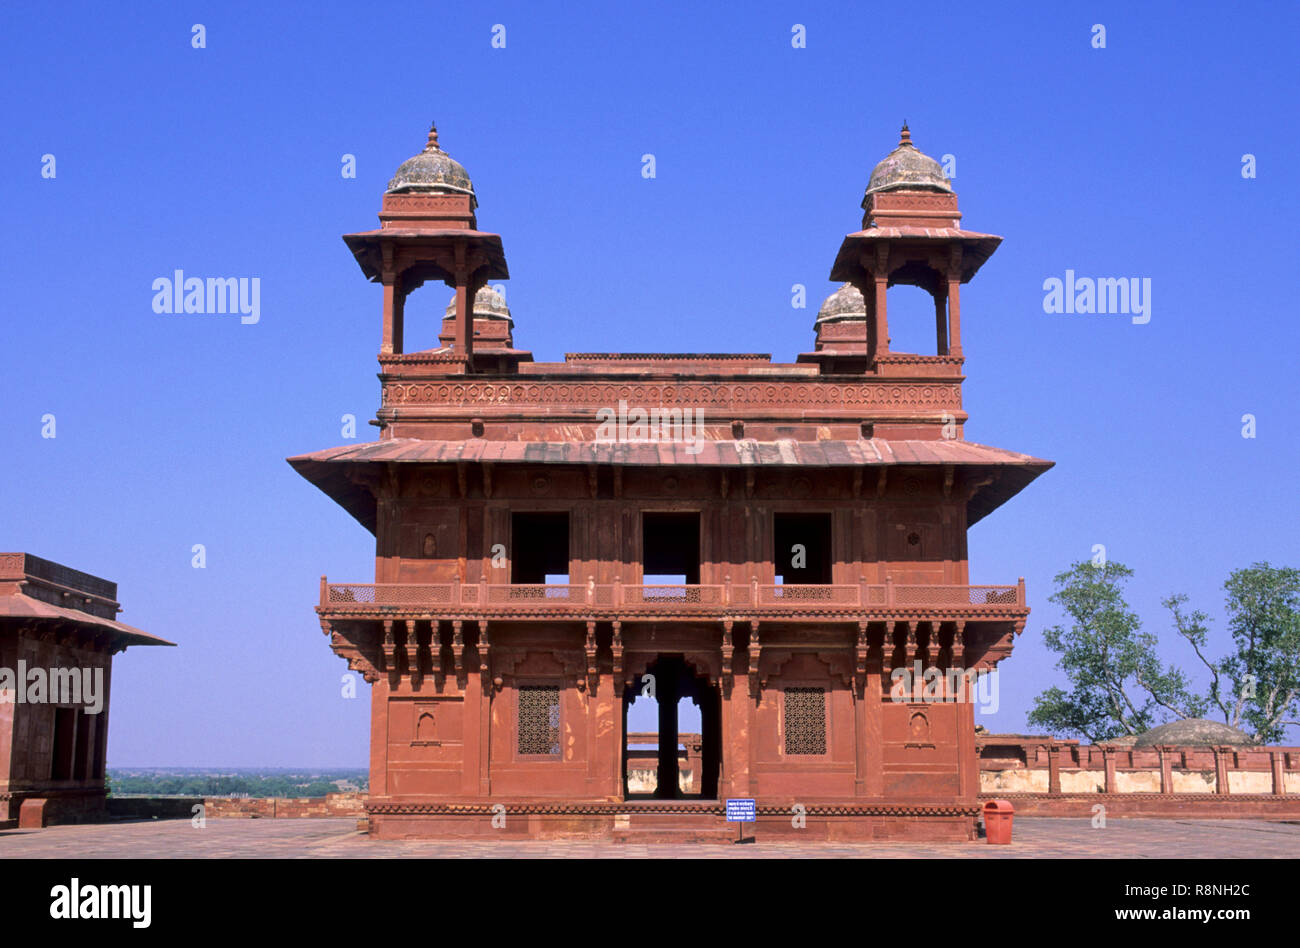 Diwan-e-Aam or Hall of Special Audience, Fatehpur Sikri, uttar pradesh, india Stock Photo